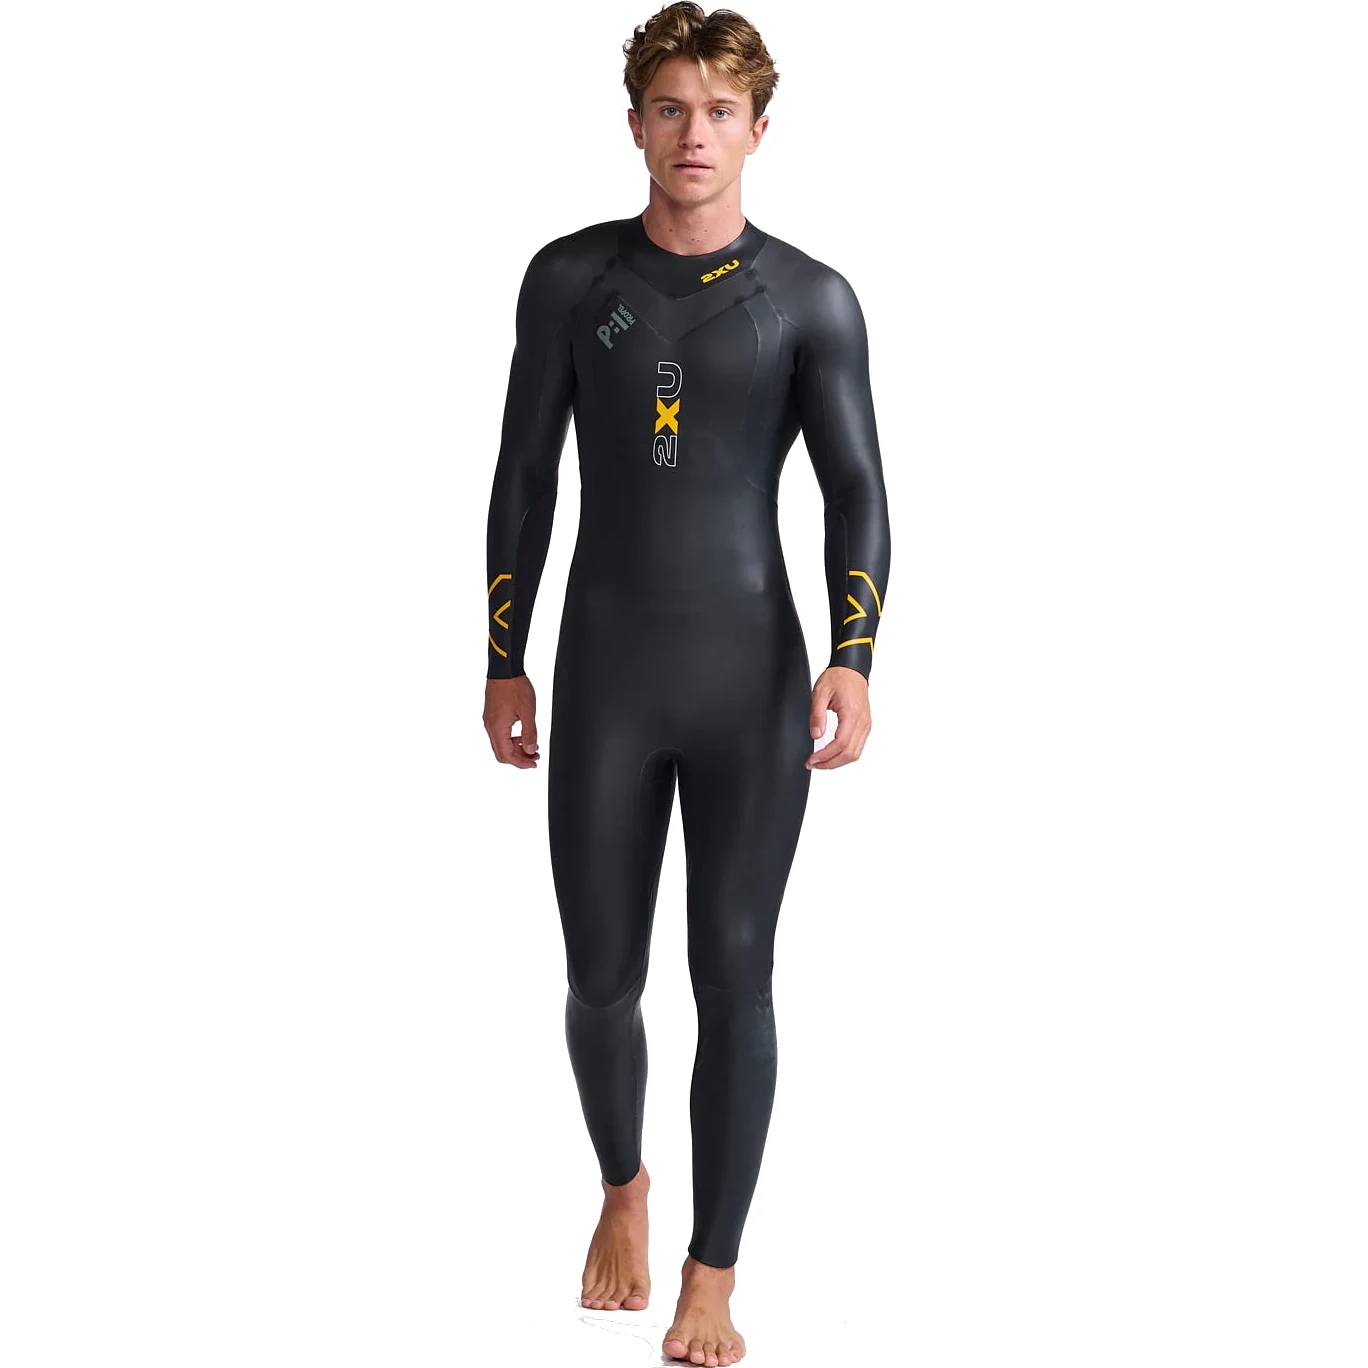 Picture of 2XU Propel P:1 Wetsuit - black/ambition